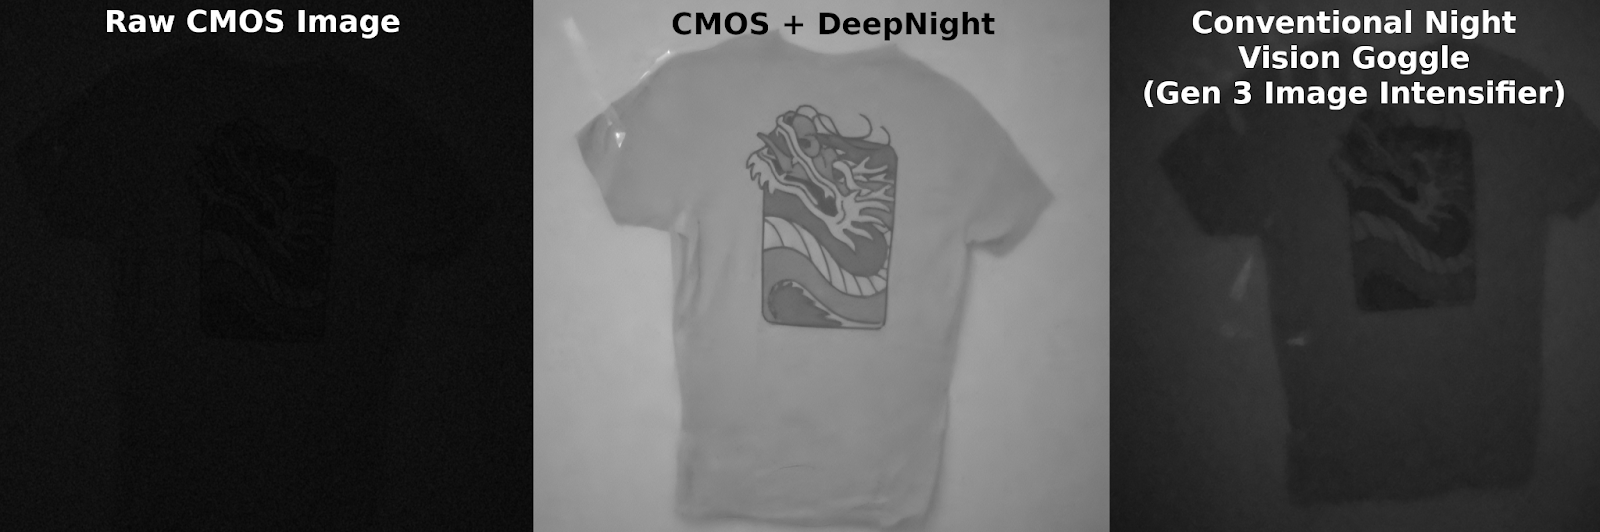 DeepNight - Building The Next Generation of Night Vision Devices